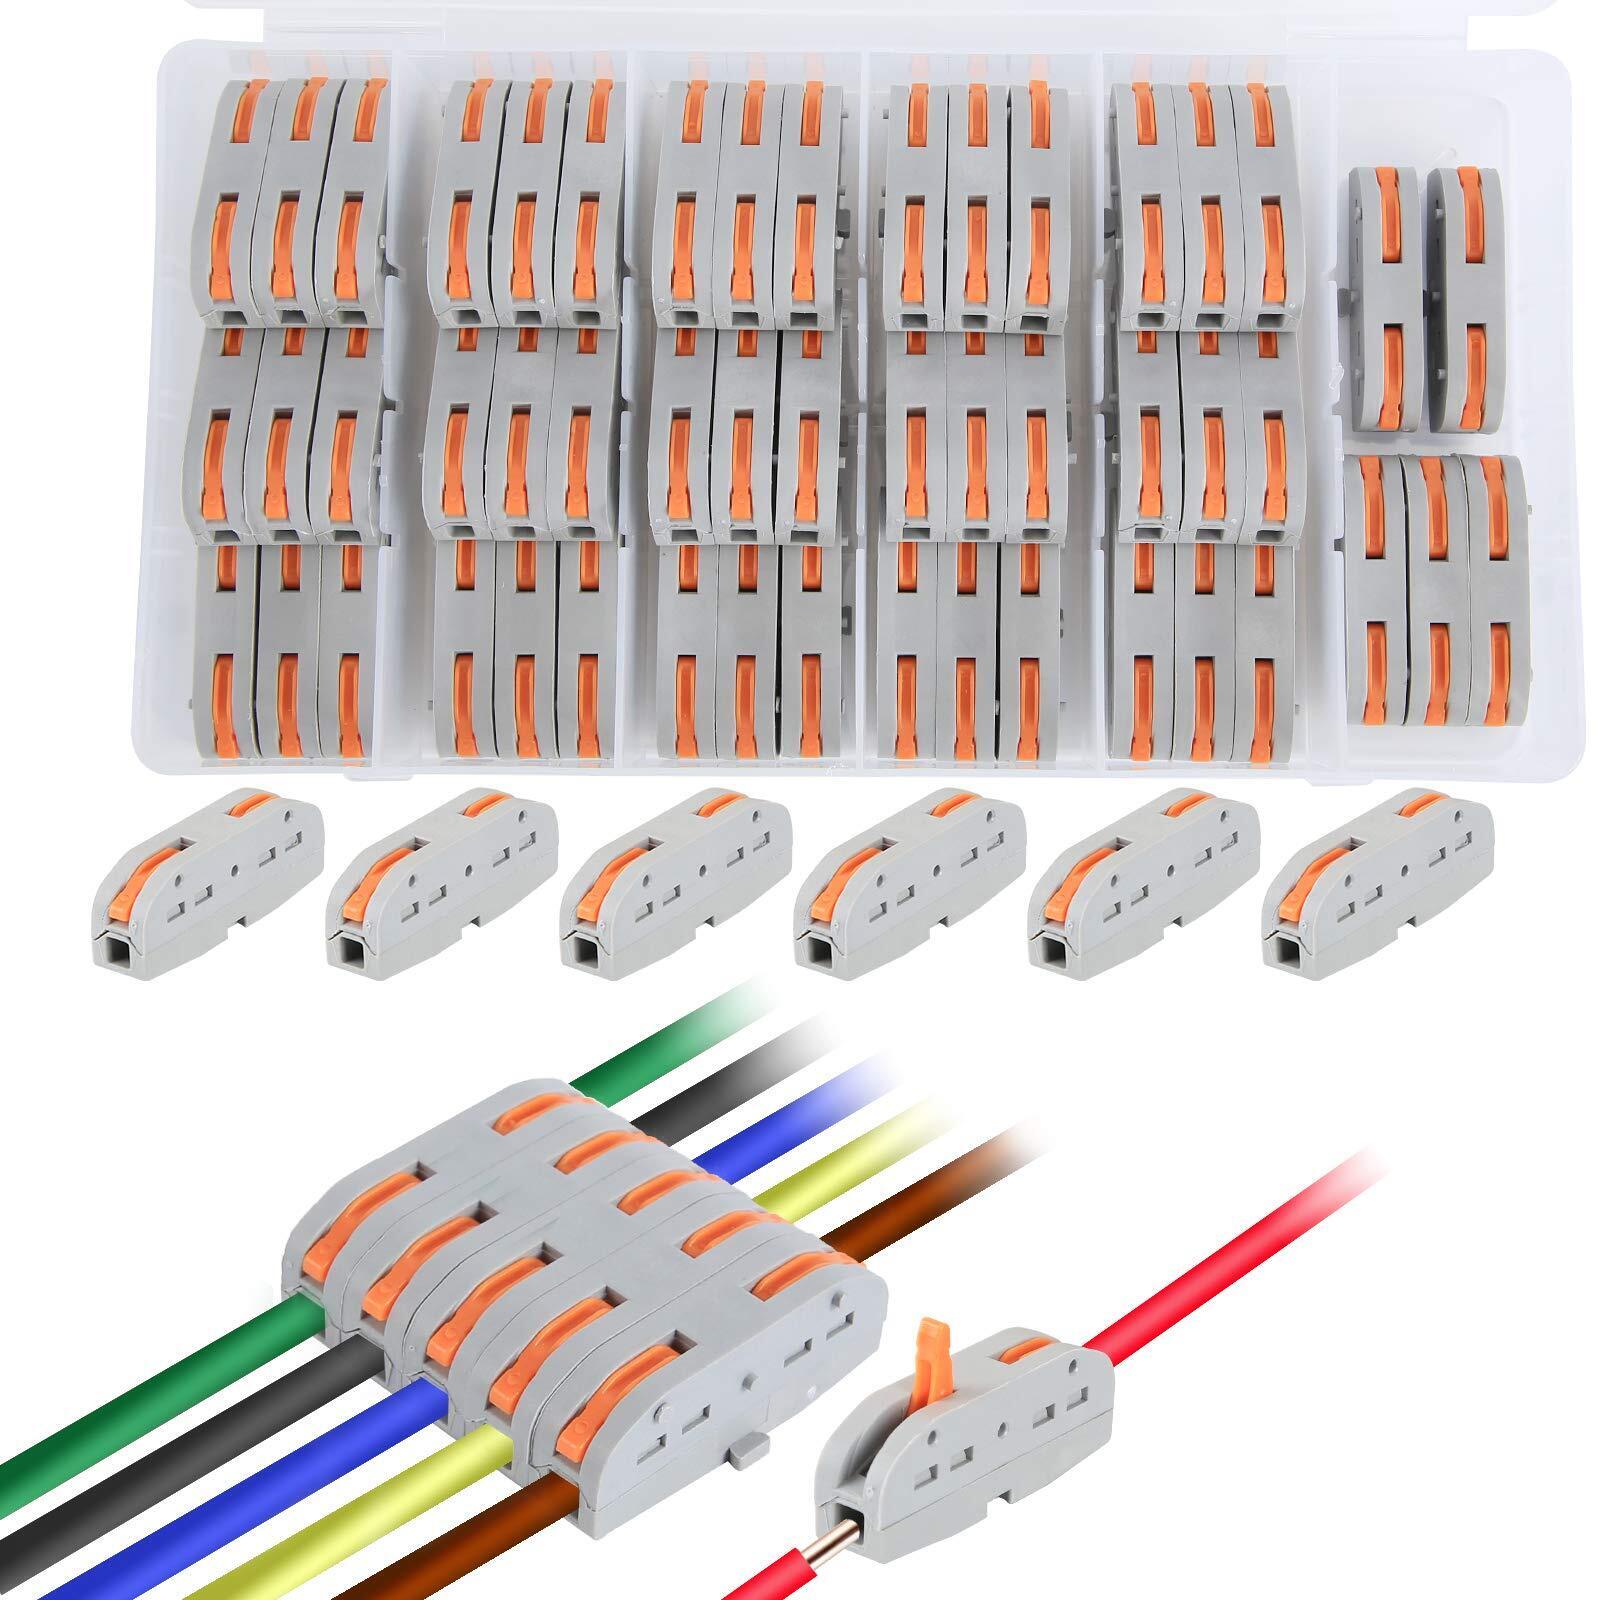 50pcs Compact Wire Conductor Connectoronetoone Quick Terminal Block Splicing Co